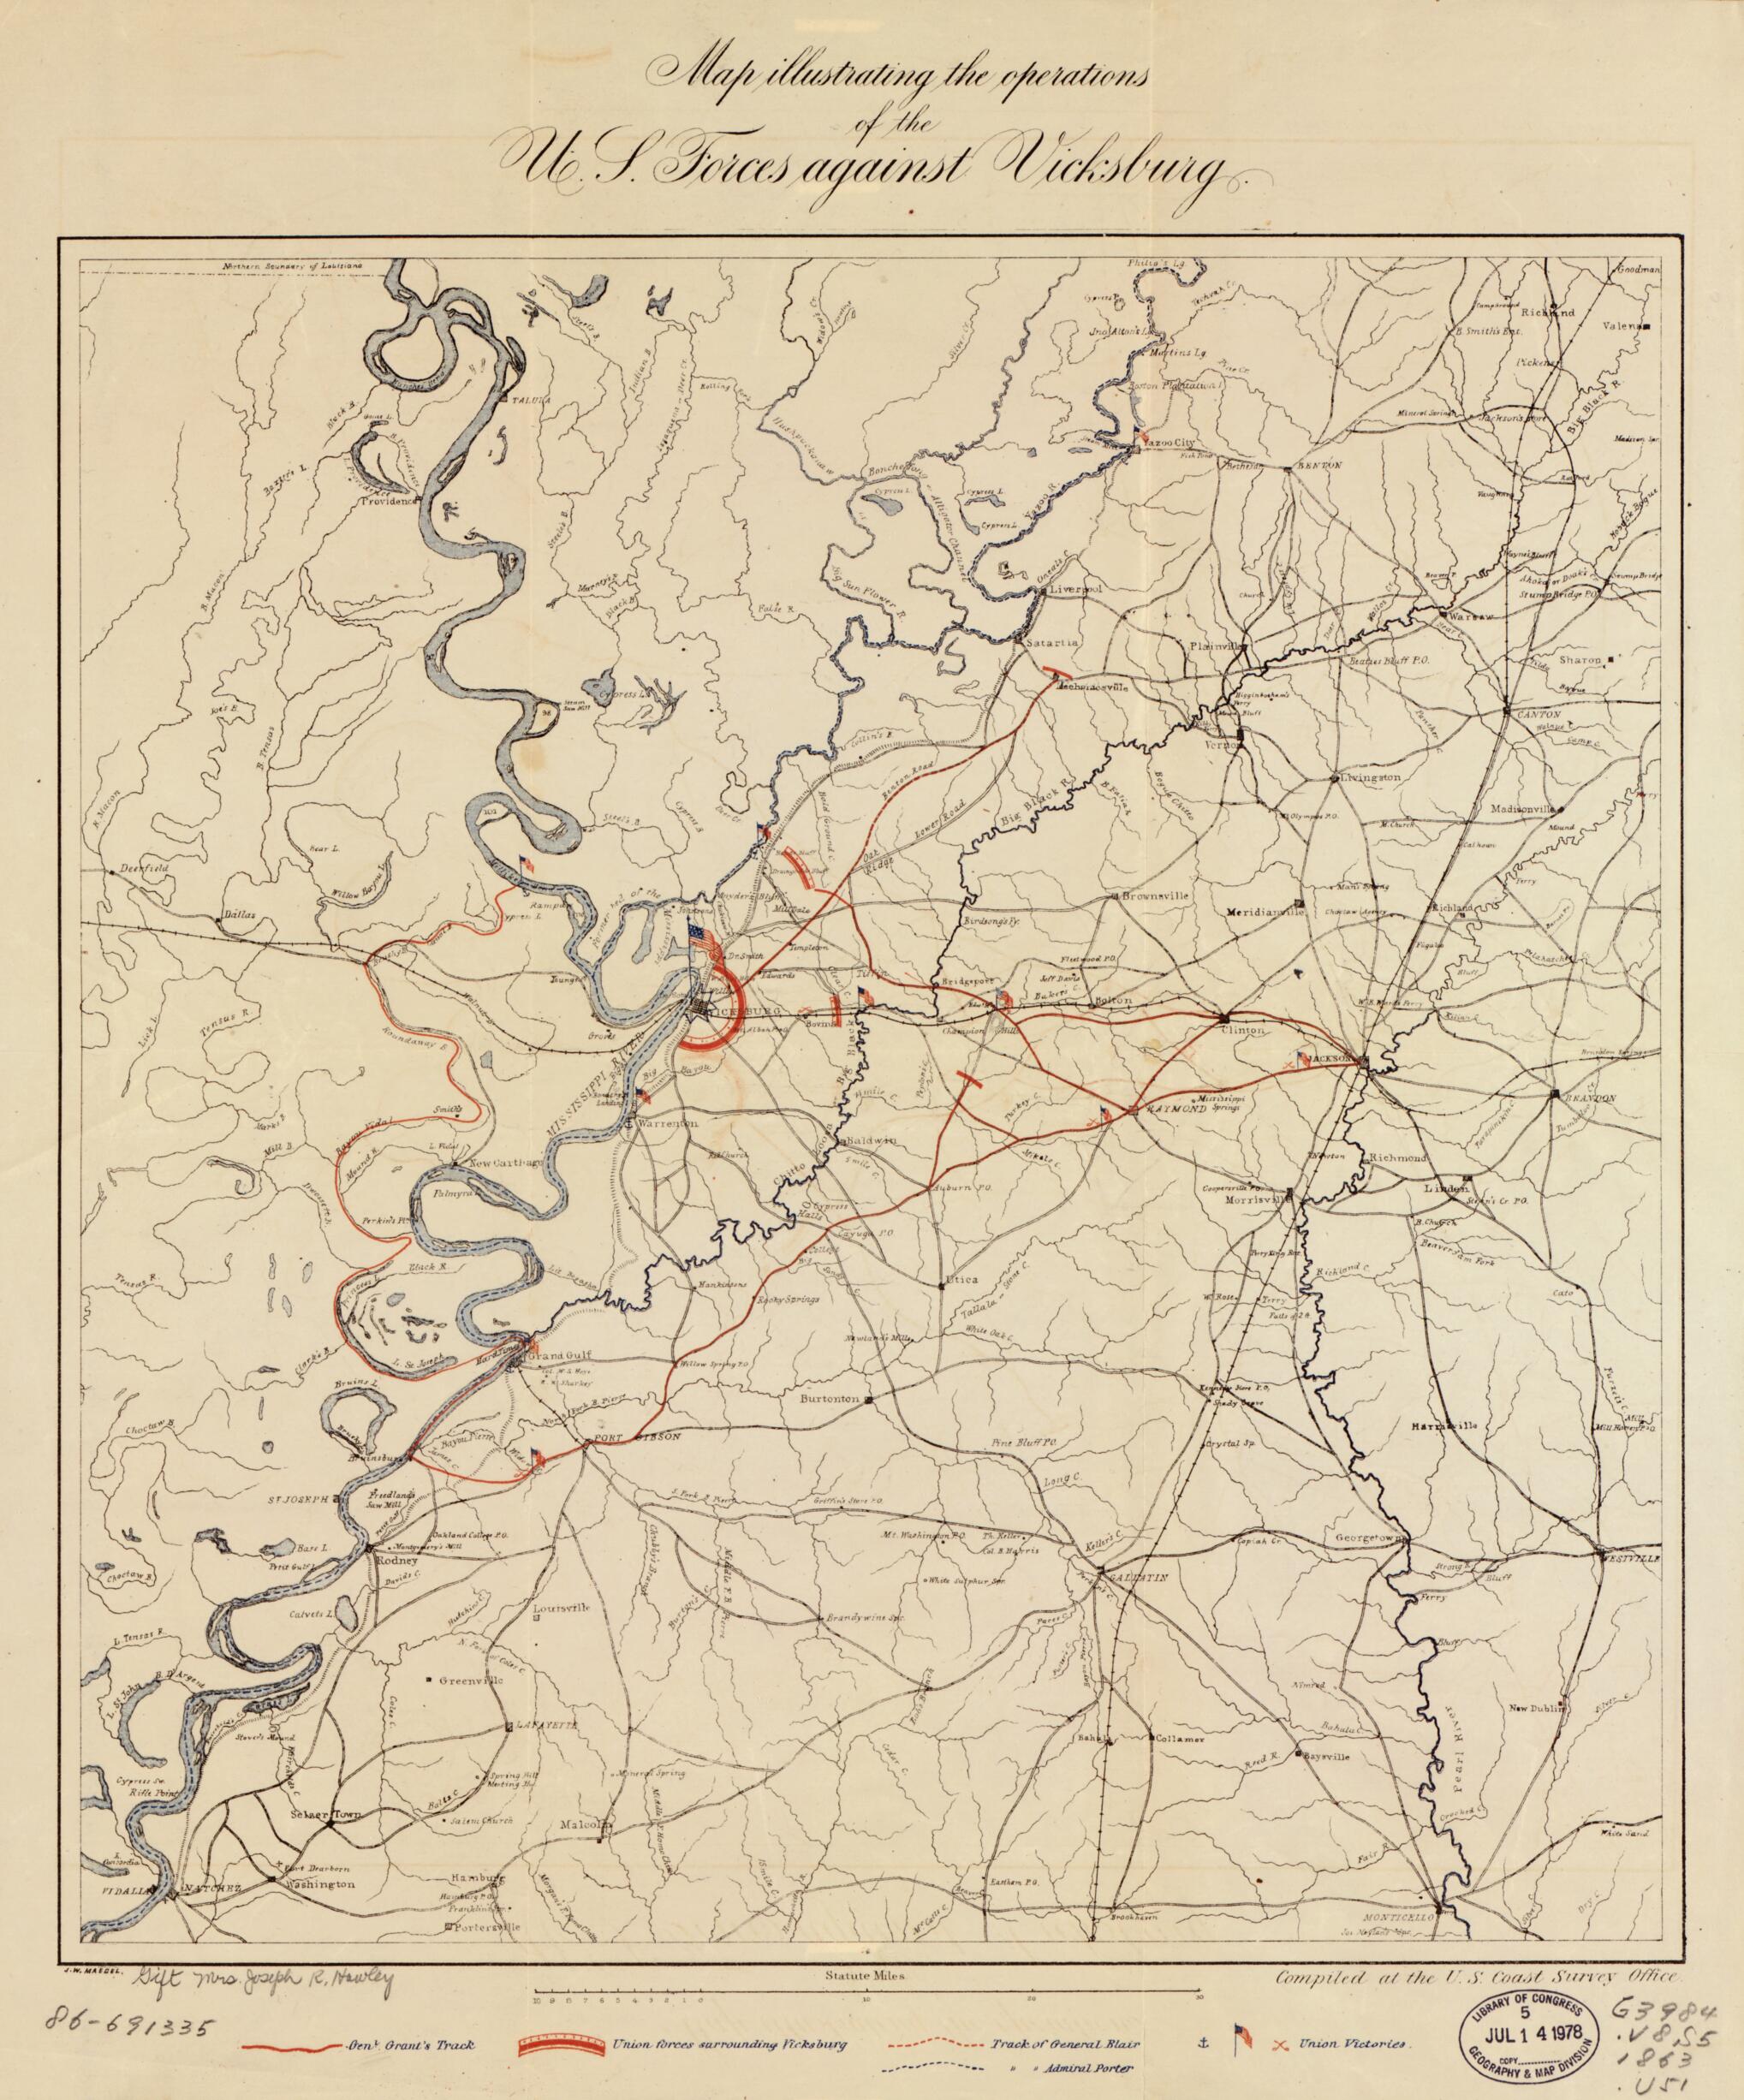 This old map of Map Illustrating the Operations of U.S. Forces Against Vicksburg from 1863 was created by Joseph R. (Joseph Roswell) Hawley, J. W. Maedel,  United States Coast Survey in 1863